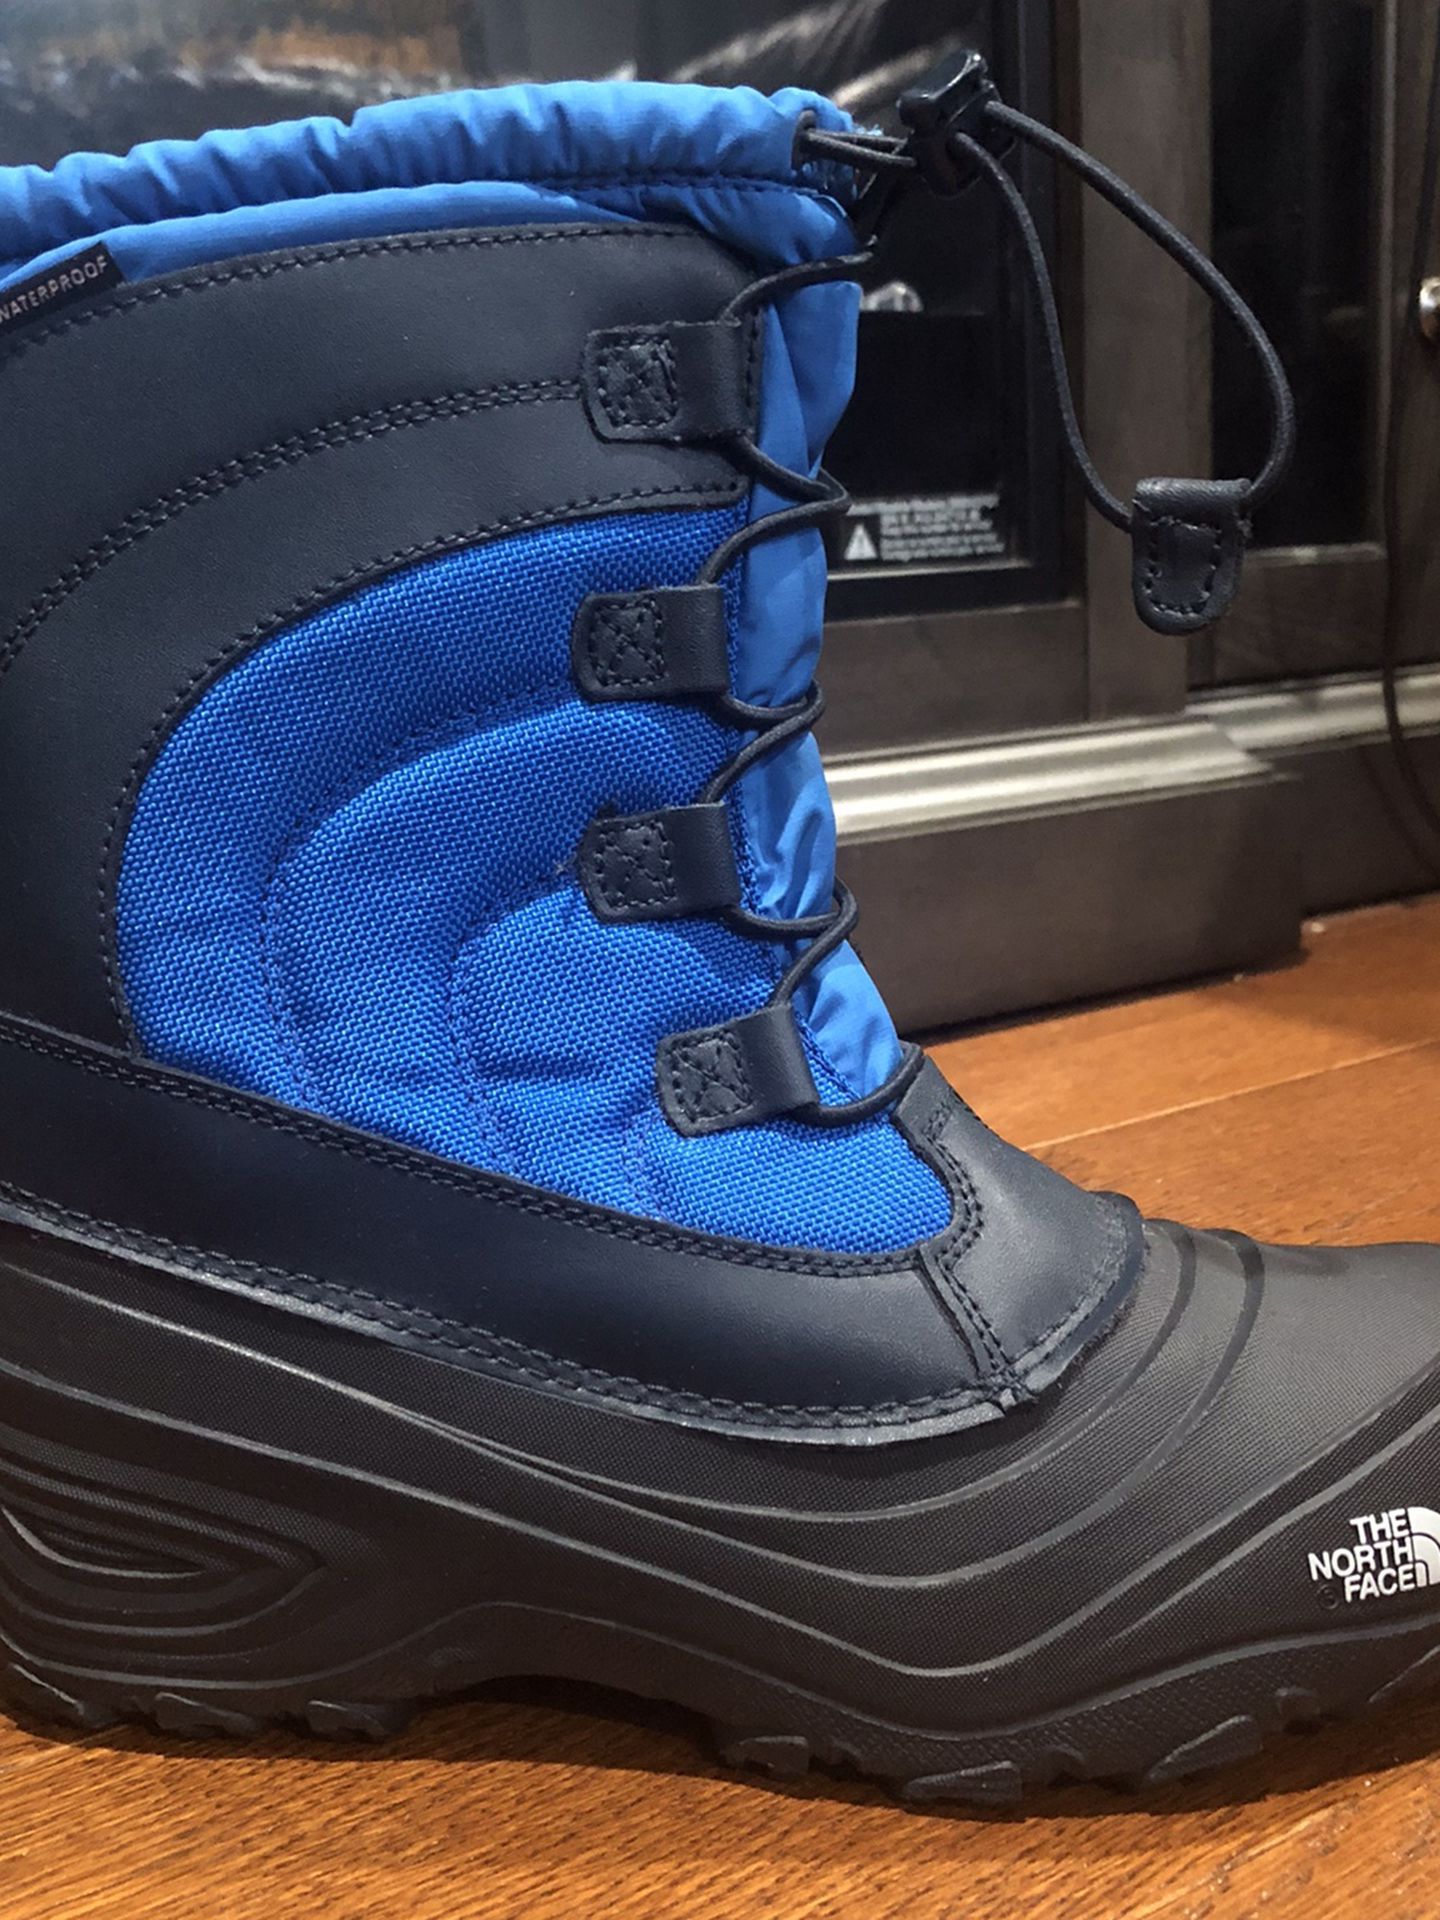 New NorthFace Boys Snow Boots ( Size 6Y)